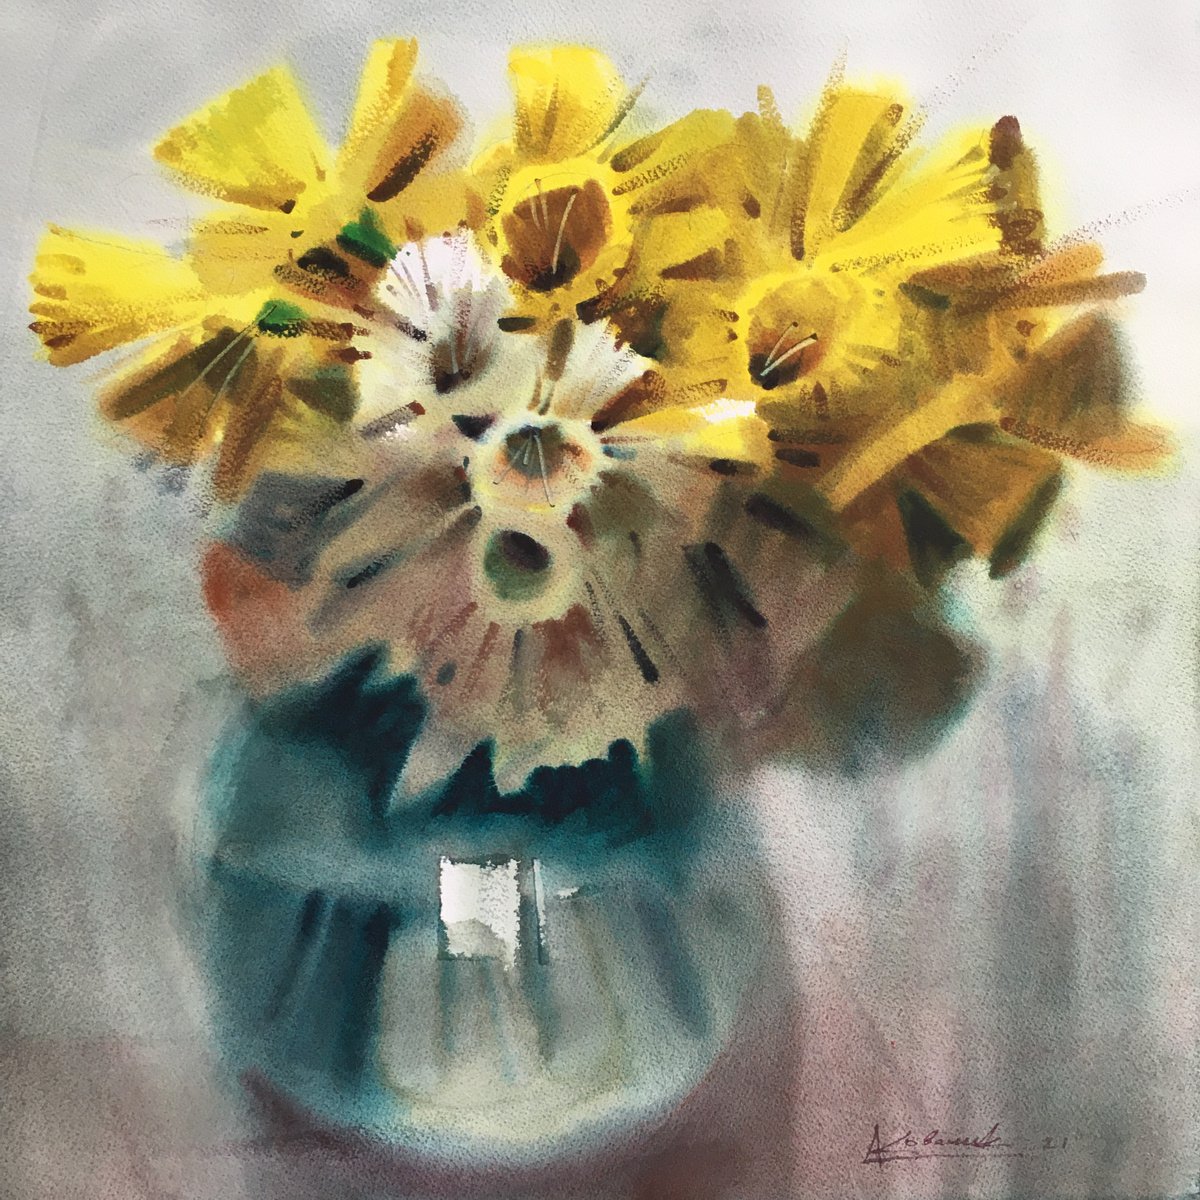 Yellow daffodils in a vase by Andrii Kovalyk